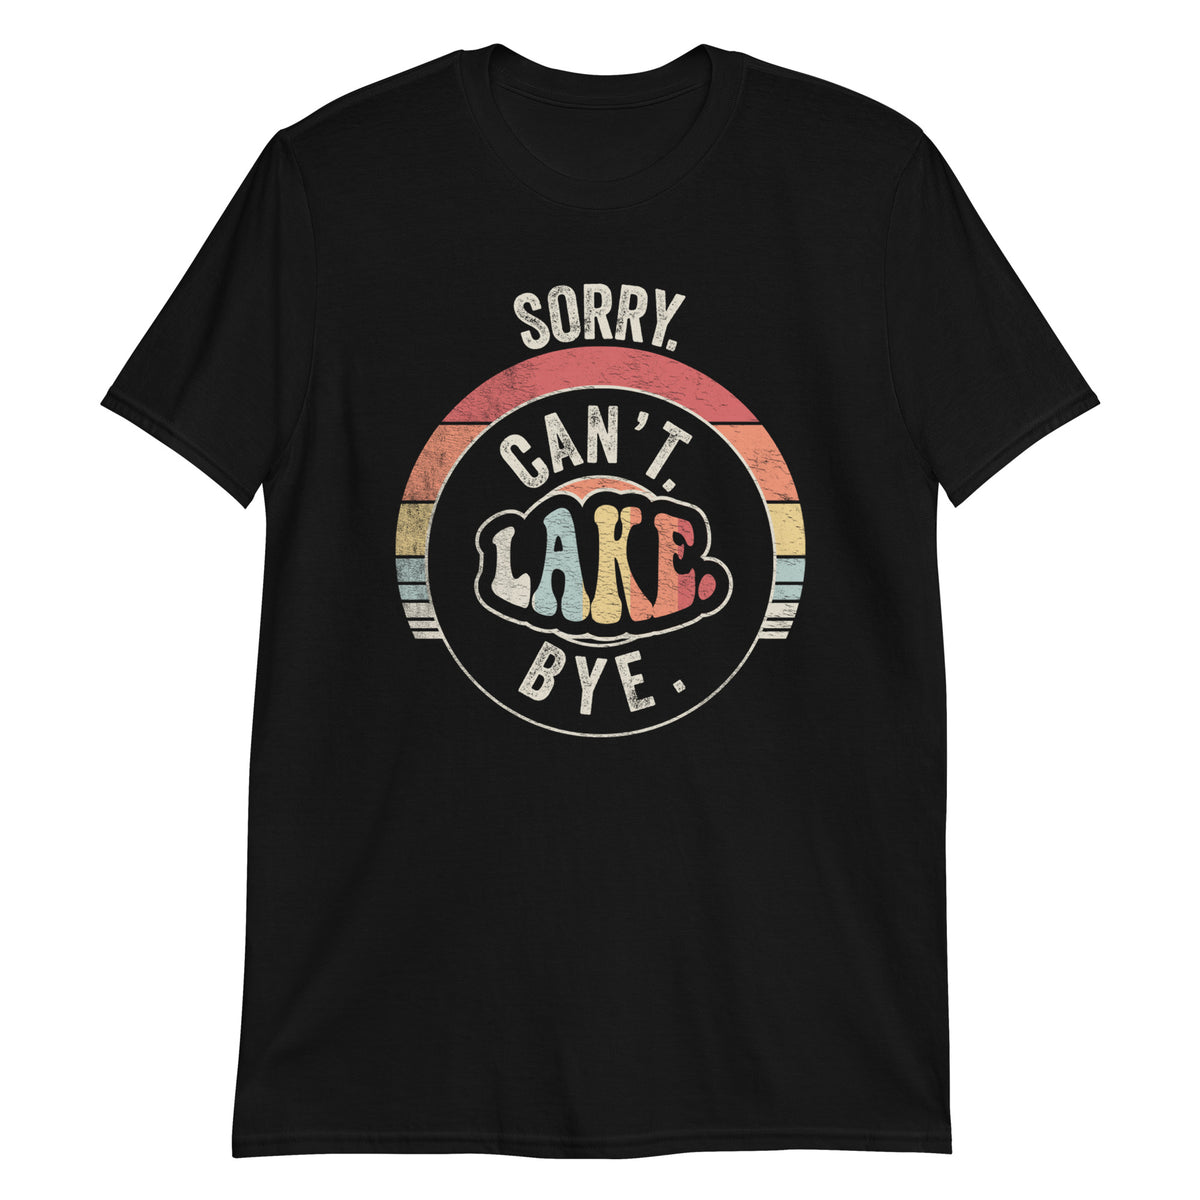 Sorry Can't Lake Bye Funny Vacation Gift T-Shirt